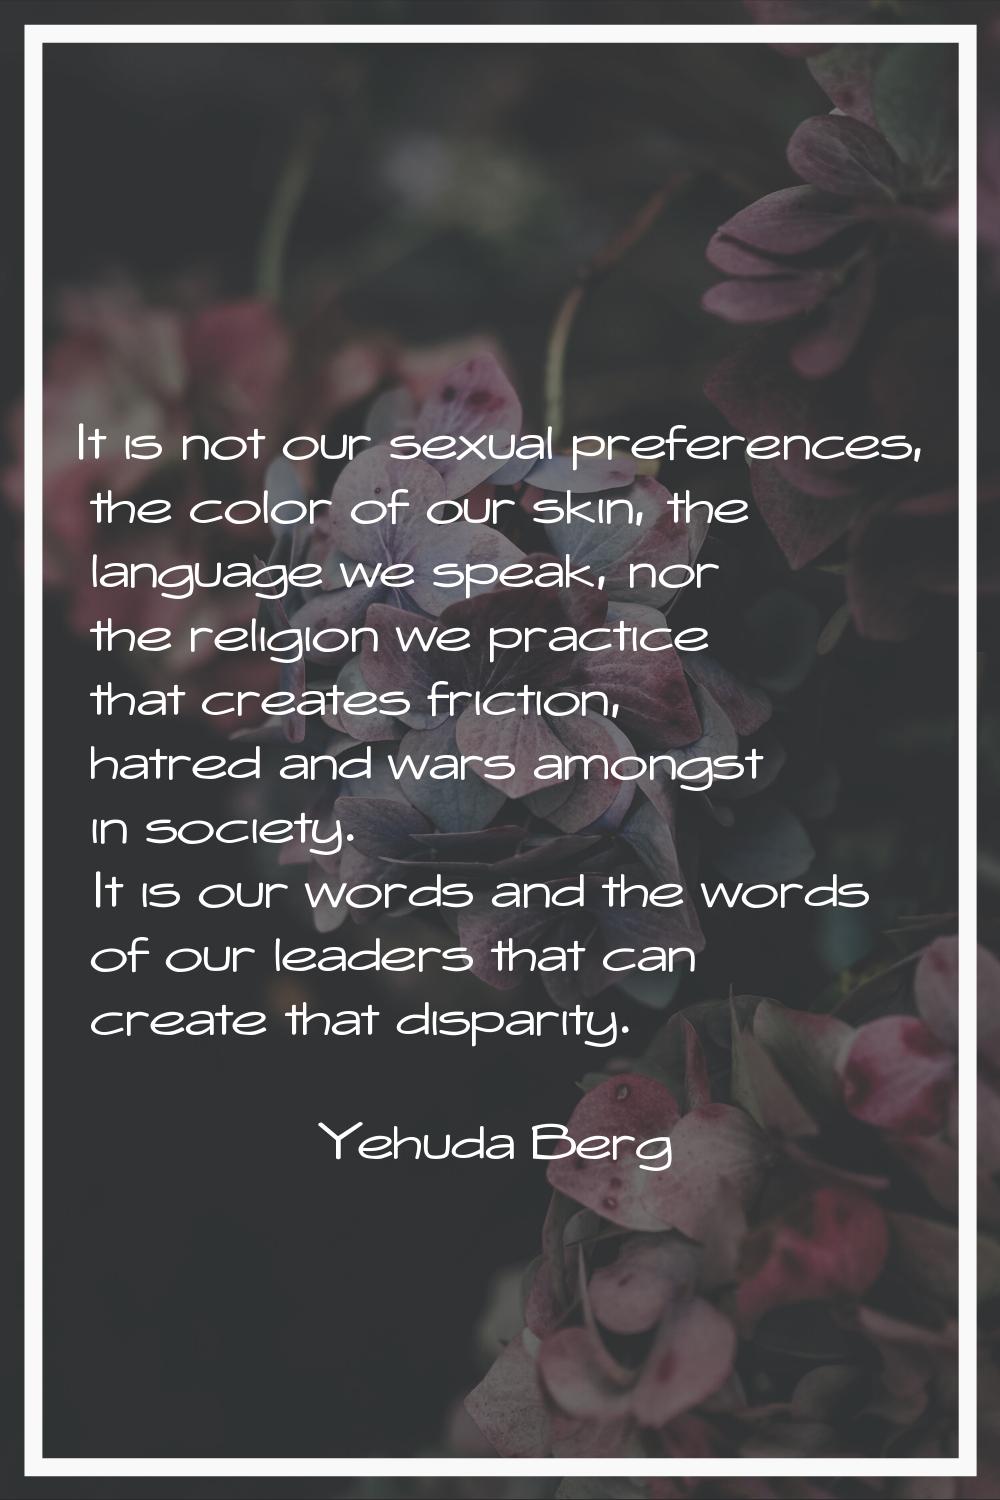 It is not our sexual preferences, the color of our skin, the language we speak, nor the religion we